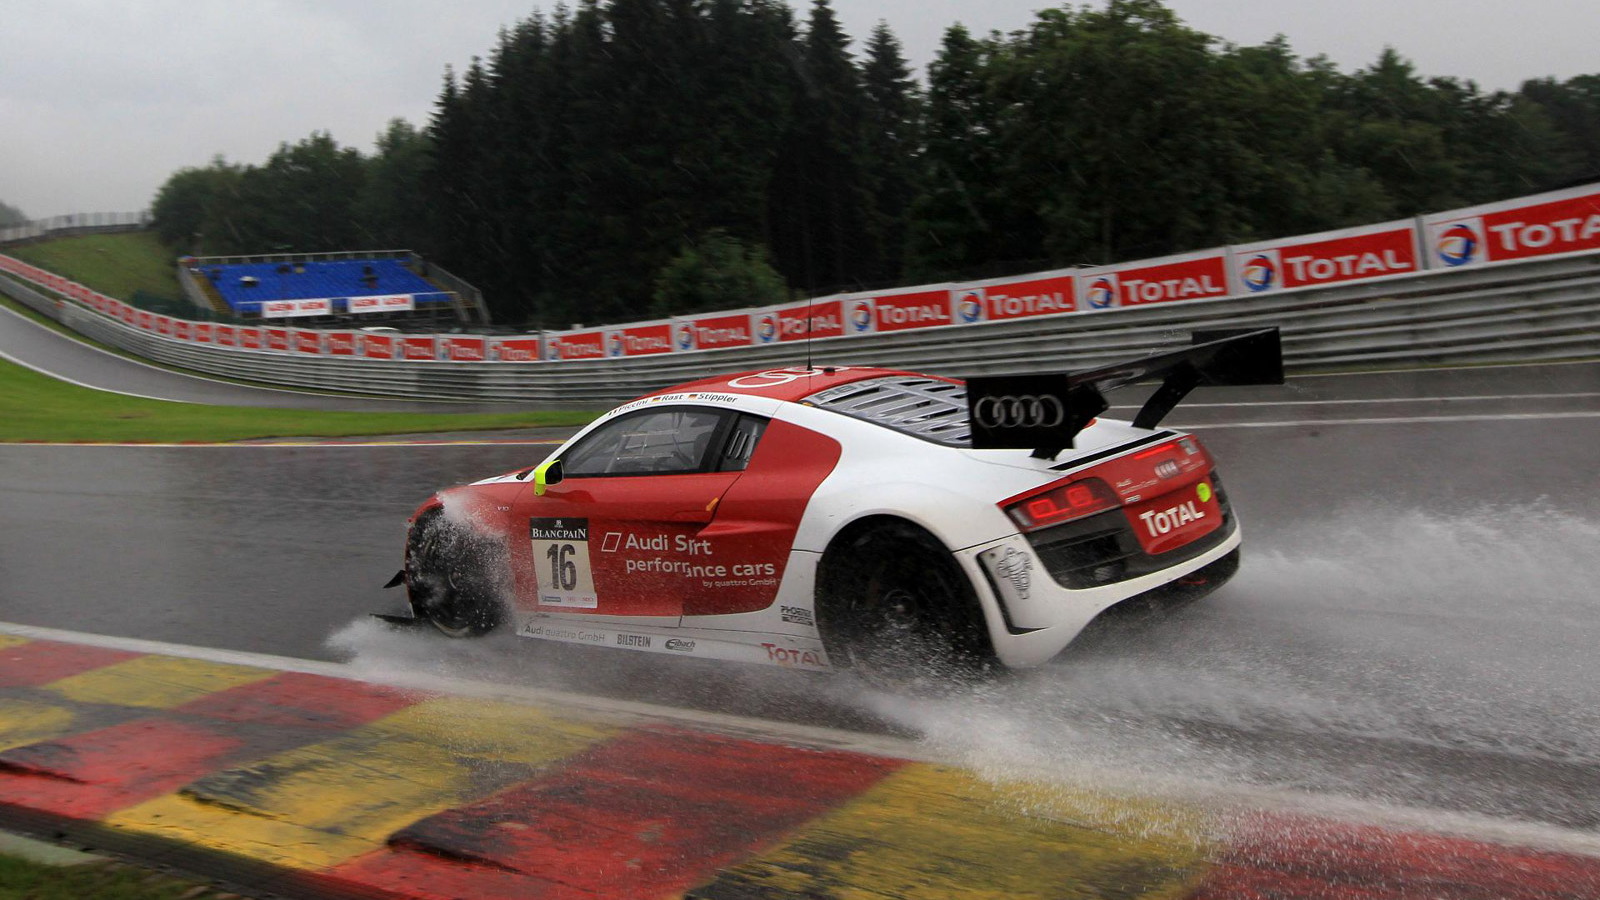 Audi at the 2012 Spa 24 Hours endurance race